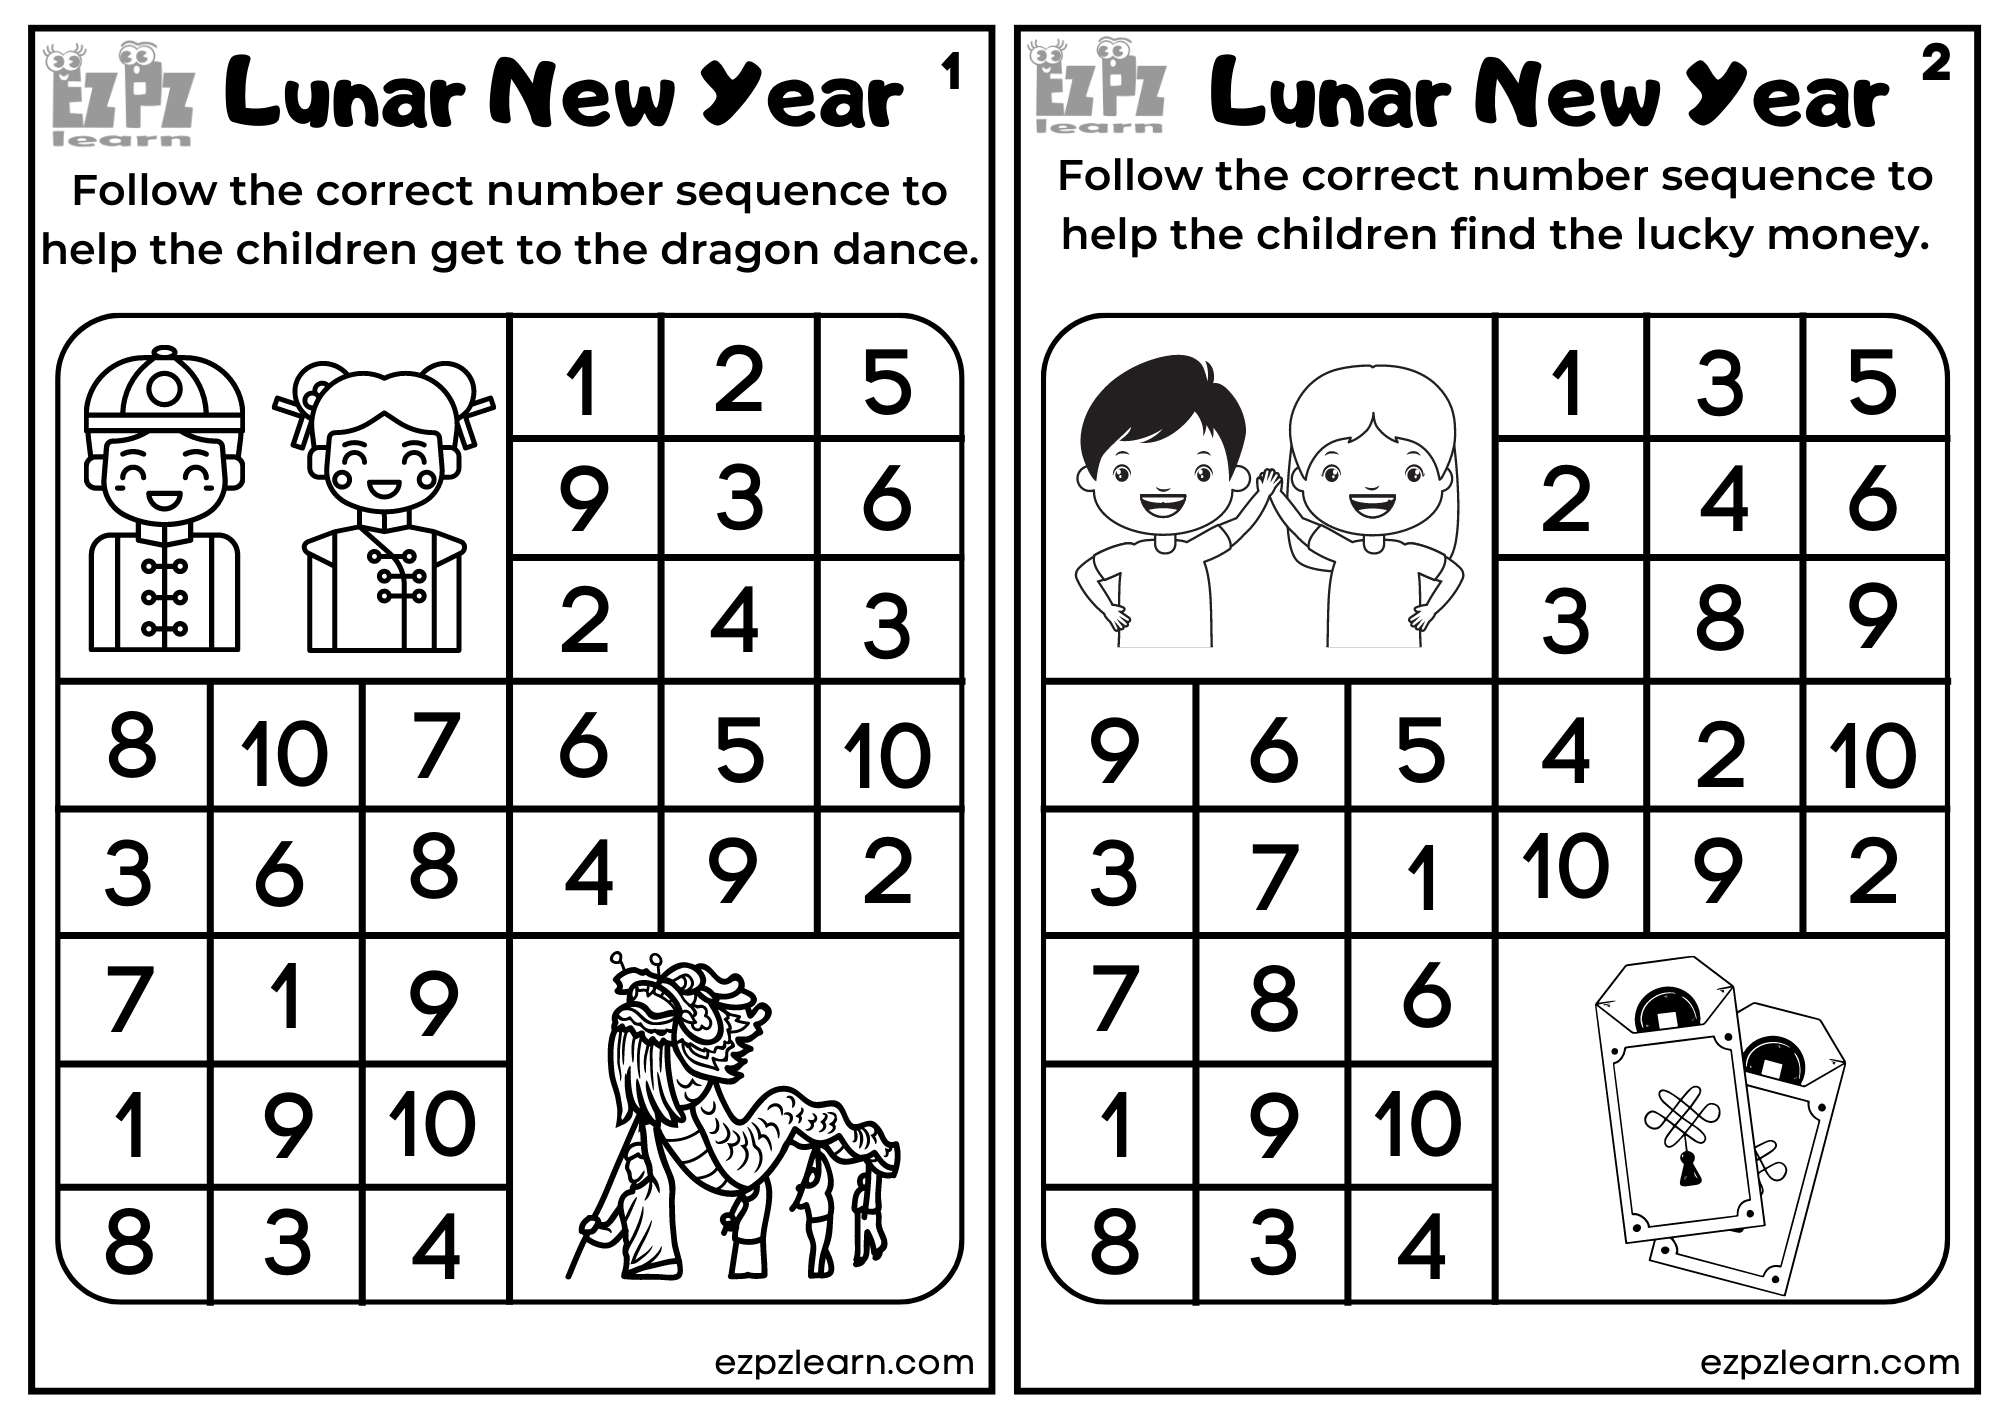 follow-the-numbers-lunar-chinese-new-year-free-pdf-download